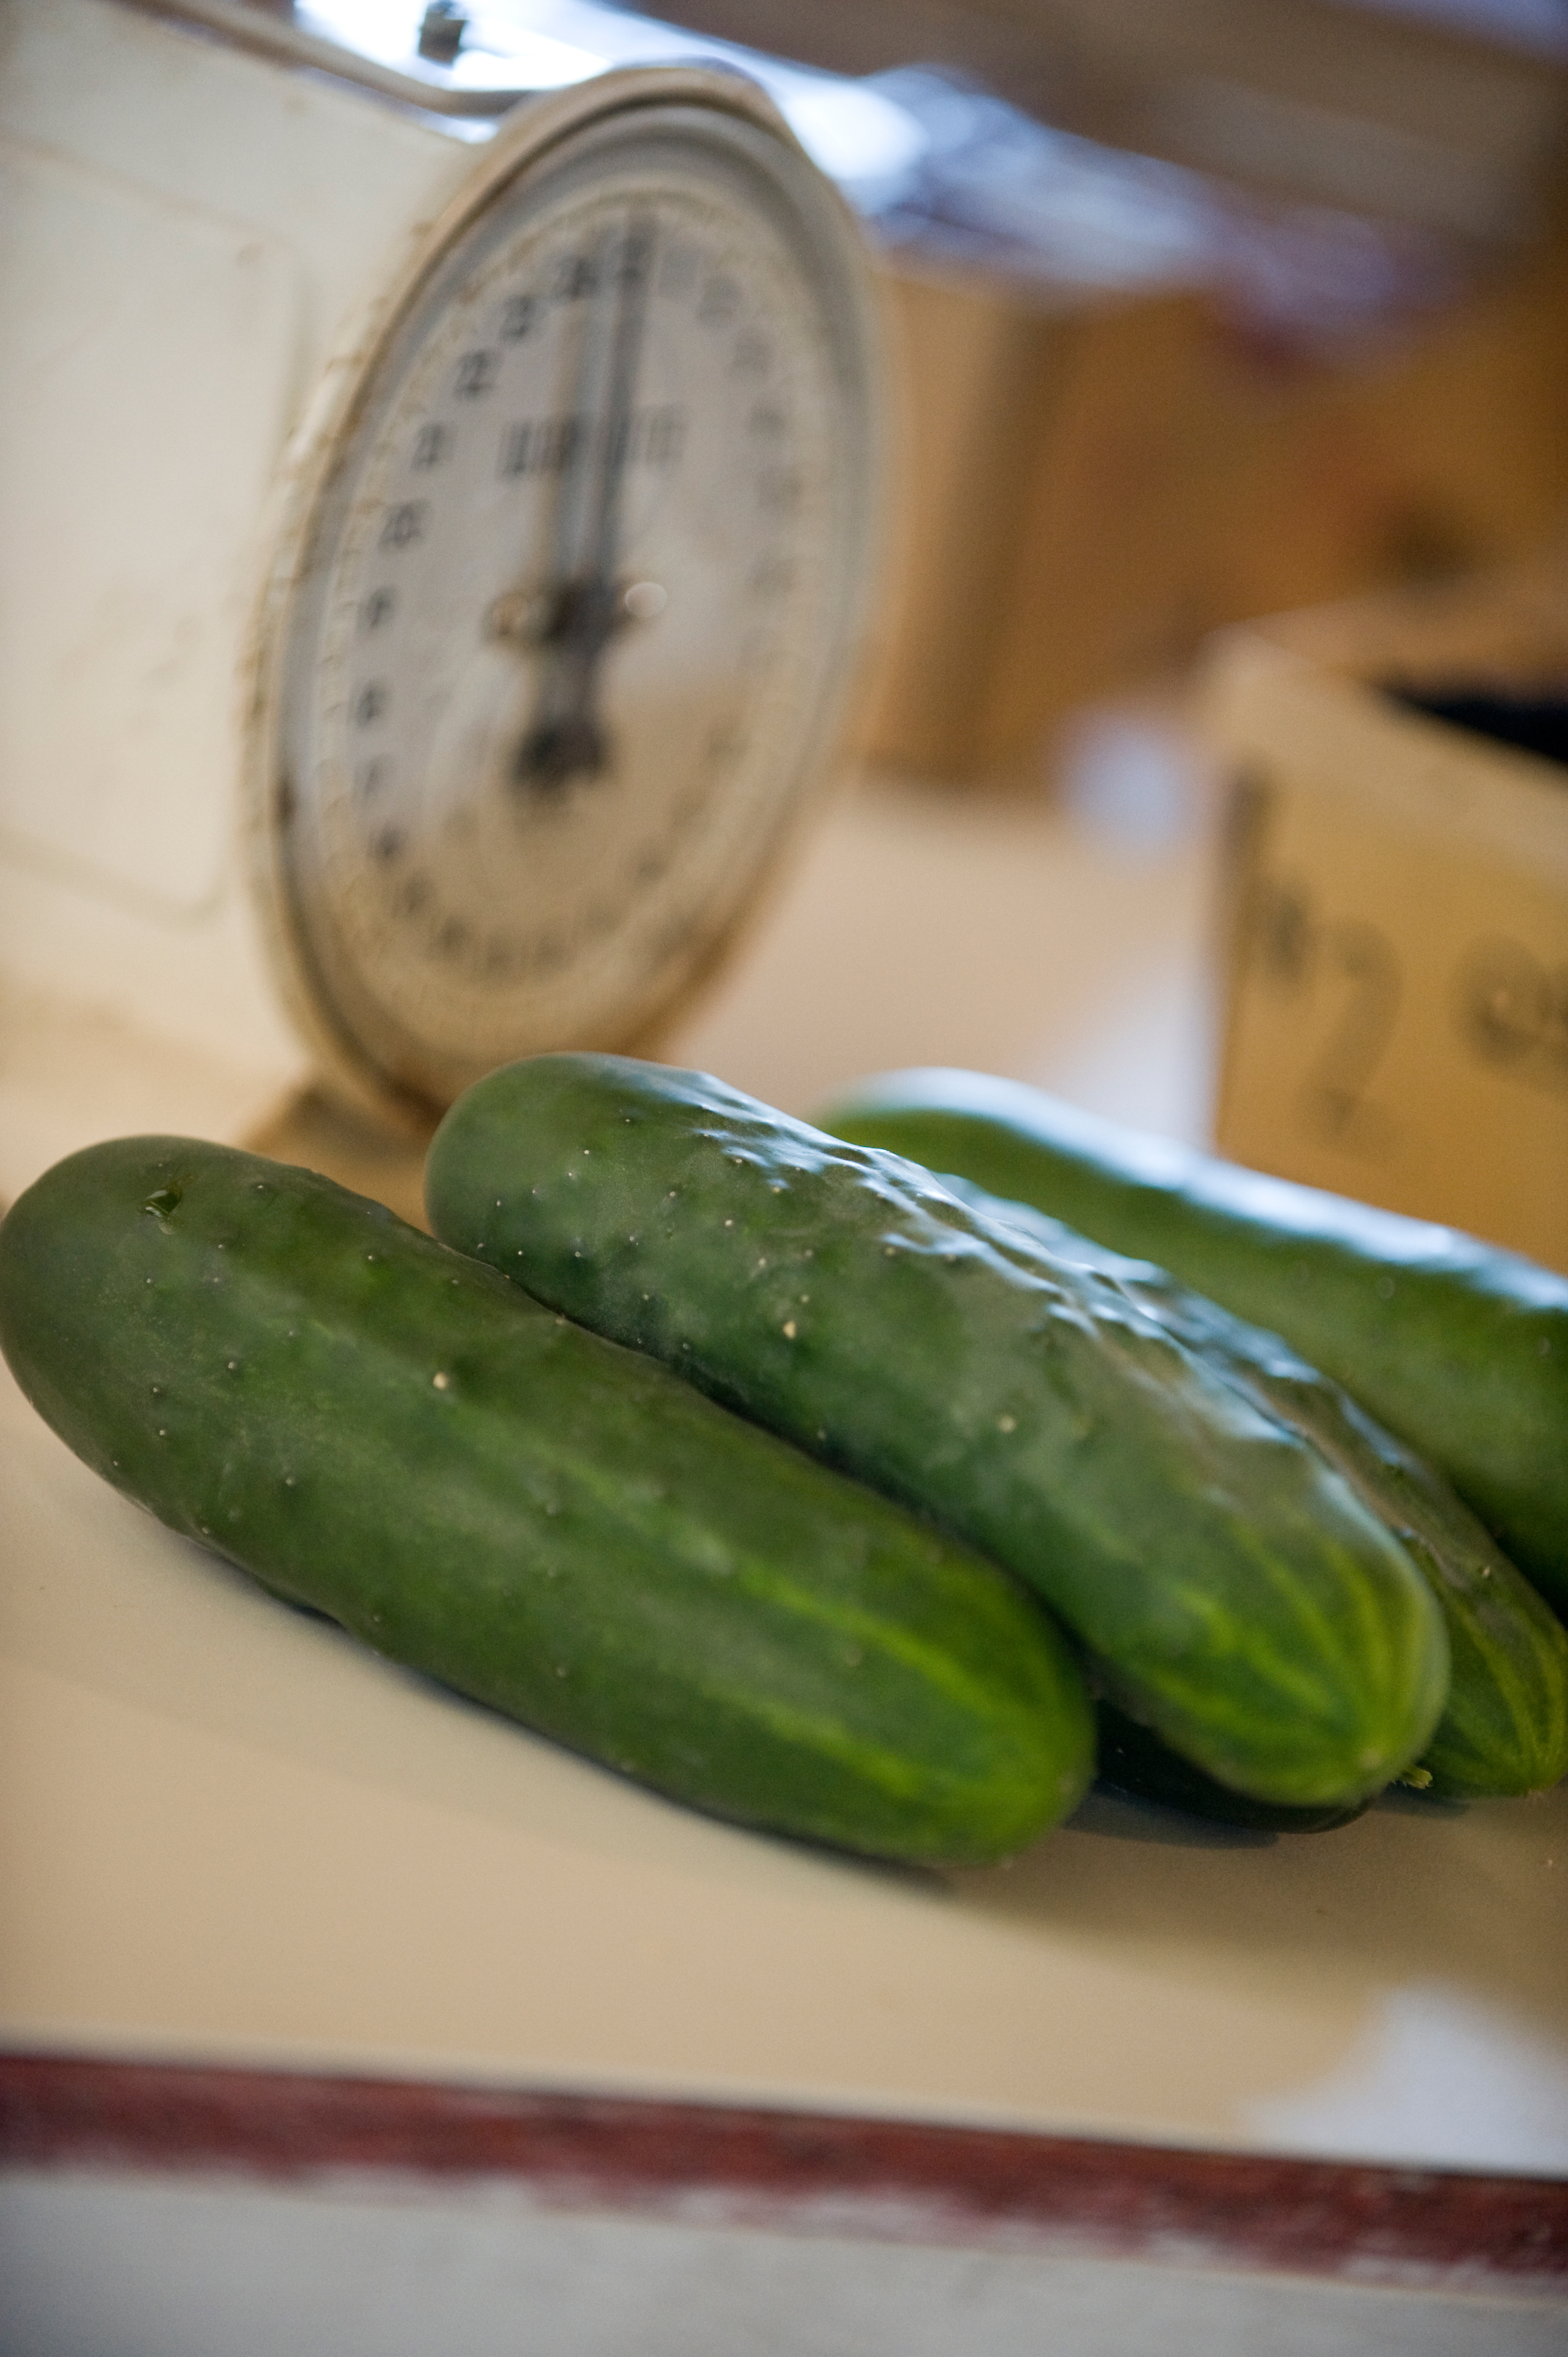 Cucumber Varieties and How to Use Them